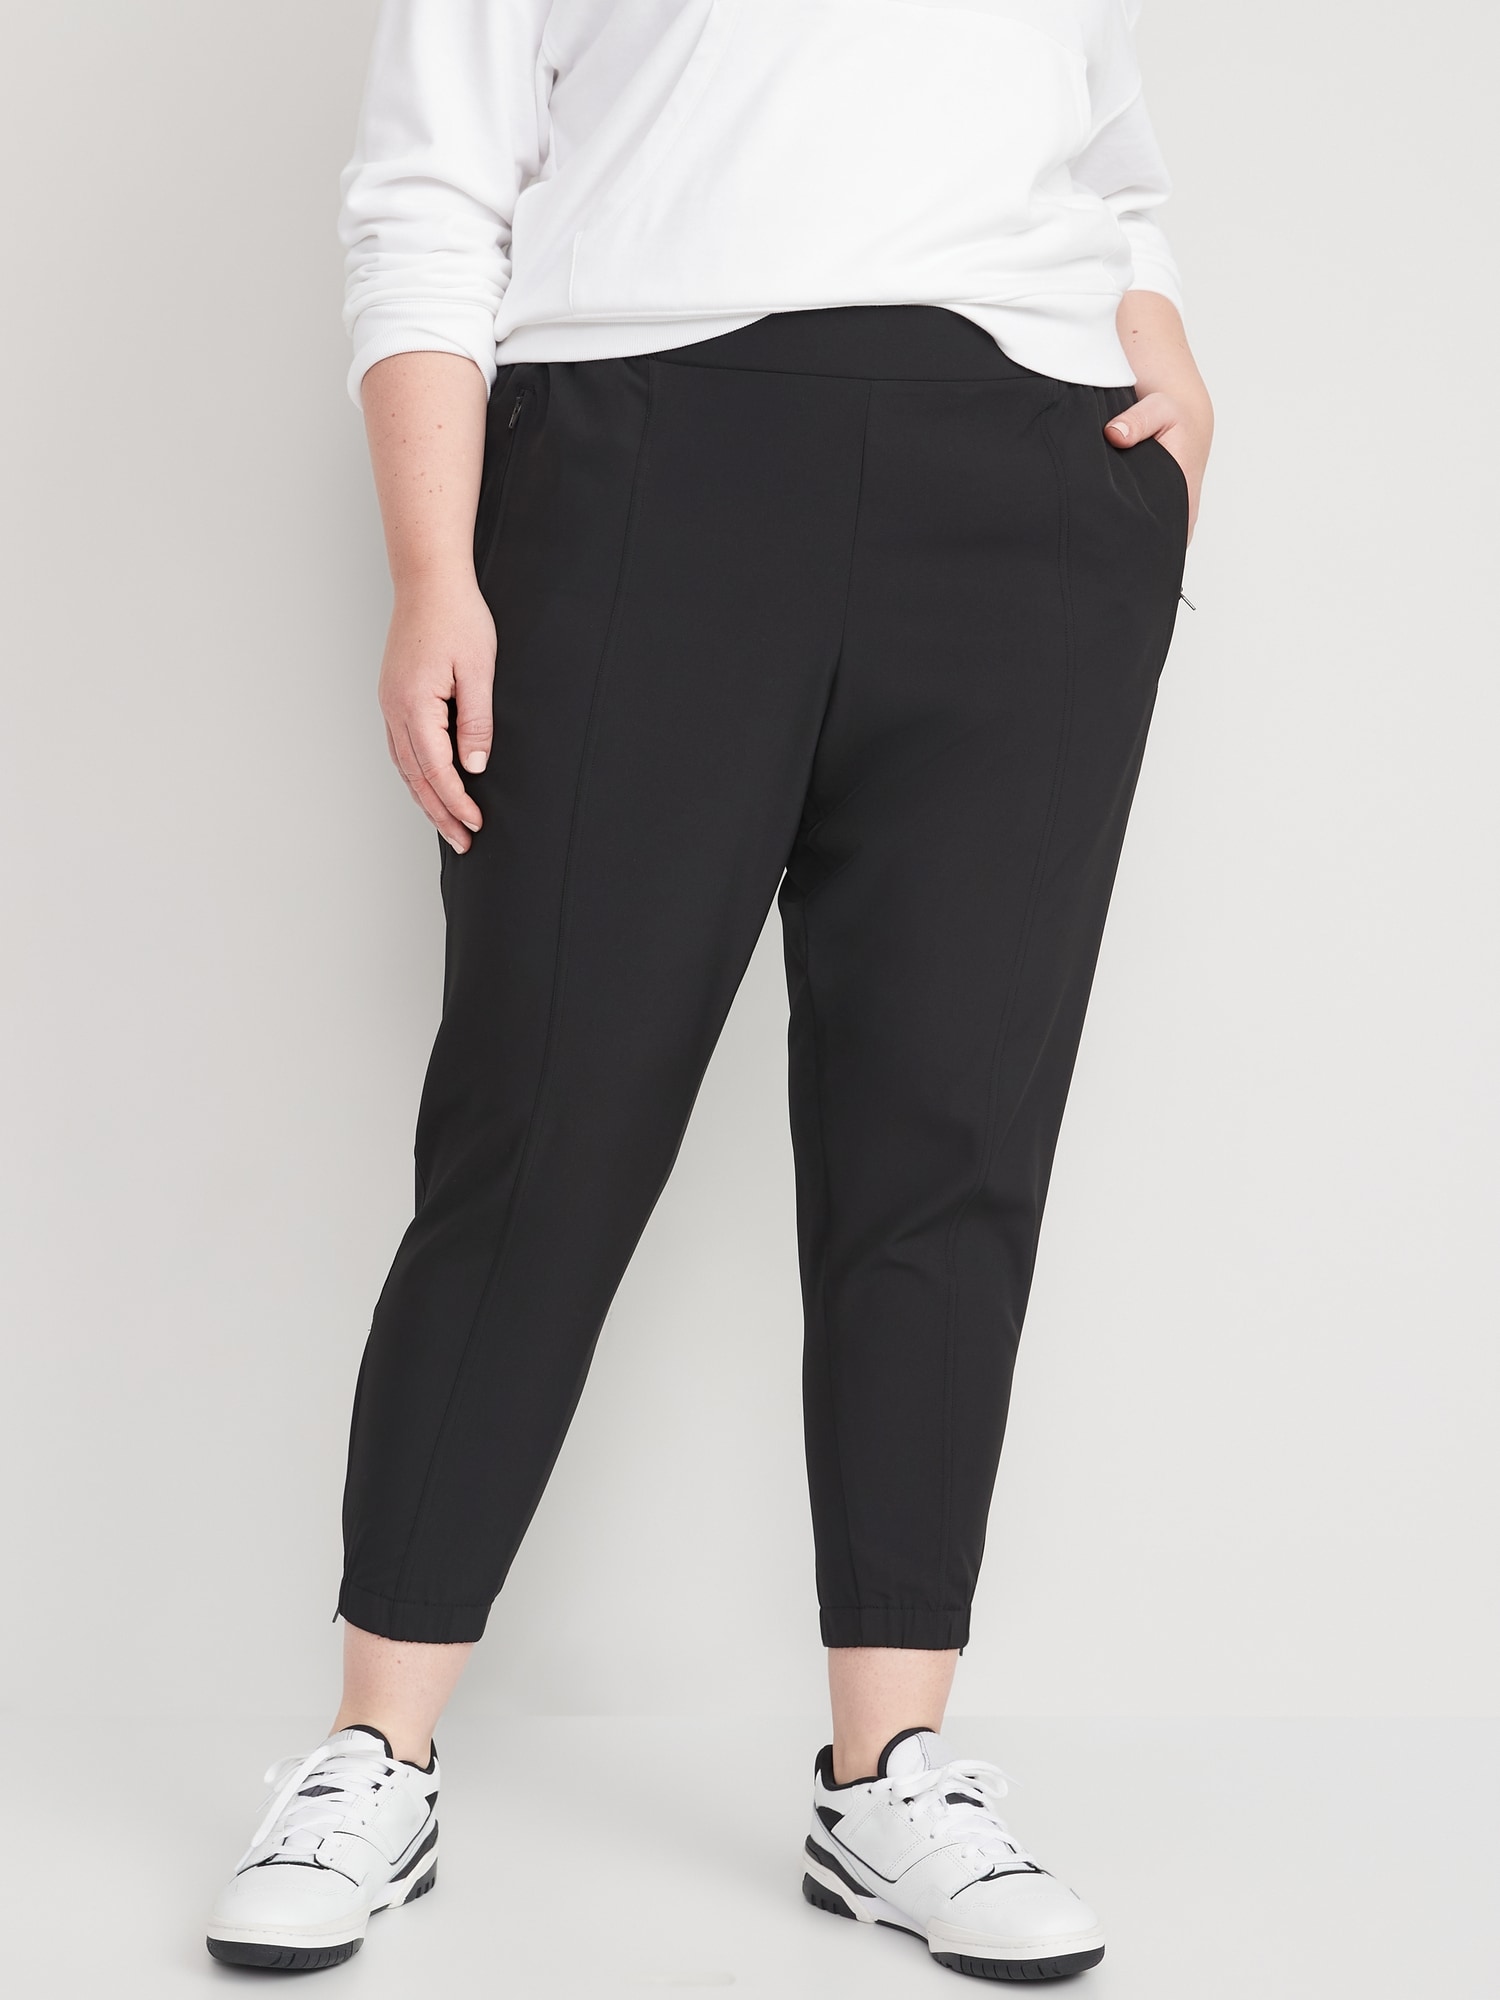 Black Joggers for Women, Tapered Techno Pant